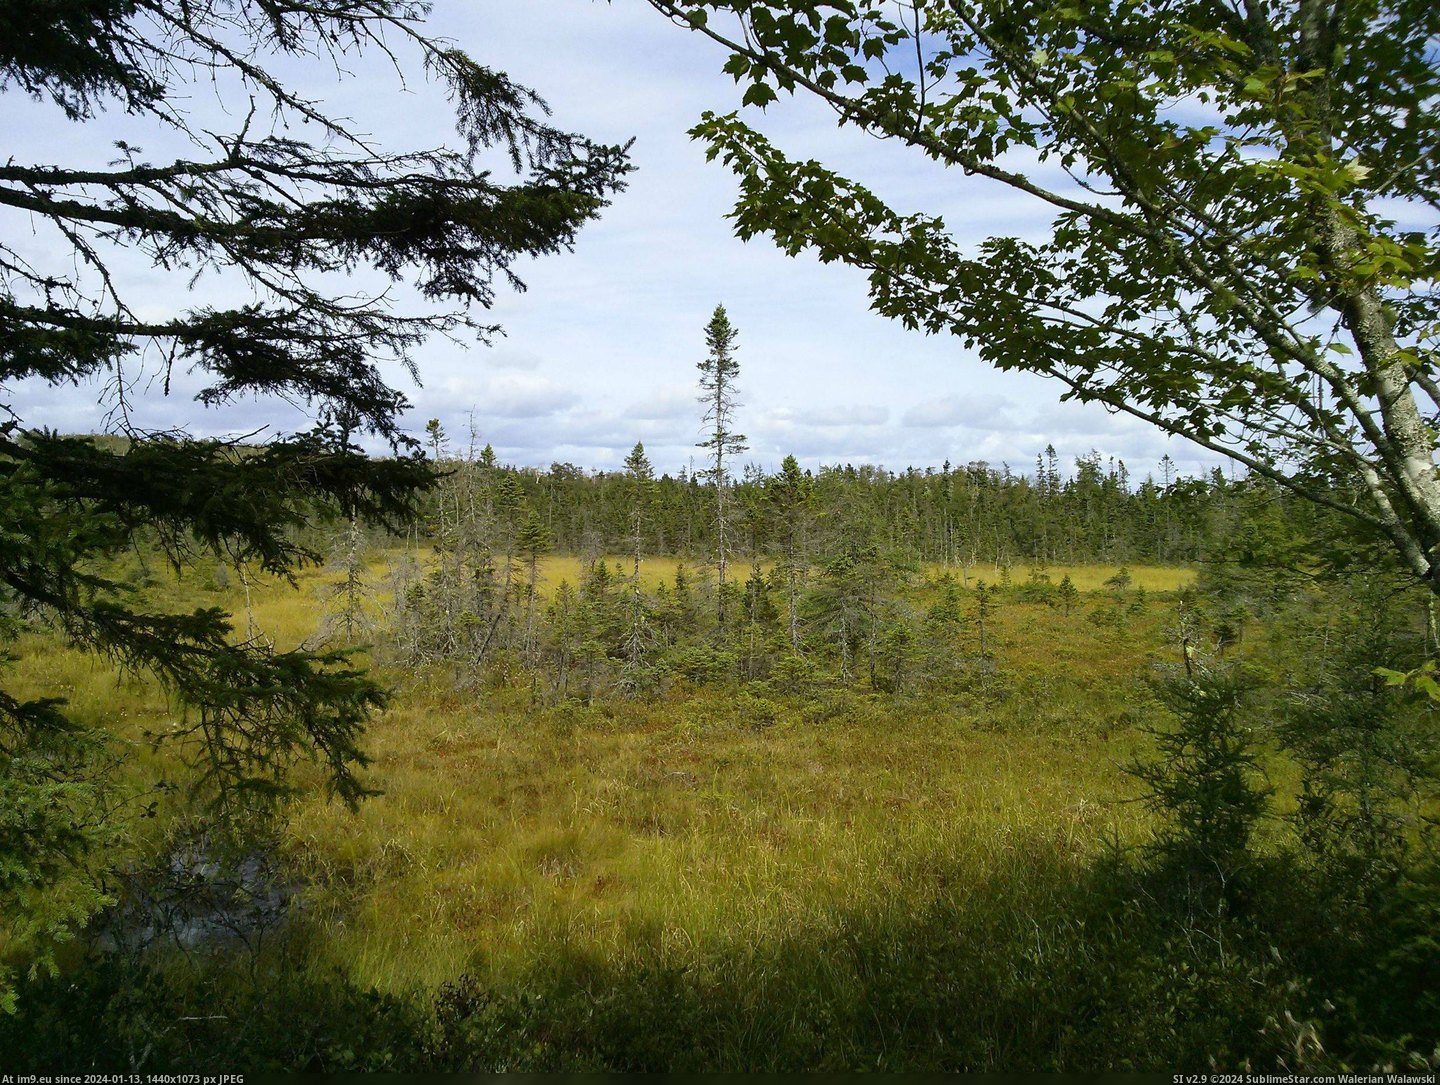 #One #Black #Trees #Scotia #Spruce #Bog #Growing #Nova #Species [Earthporn] A copse of Black spruce growing in a Nova Scotia bog. They are one of few species of trees that can thrive in the we Pic. (Image of album My r/EARTHPORN favs))